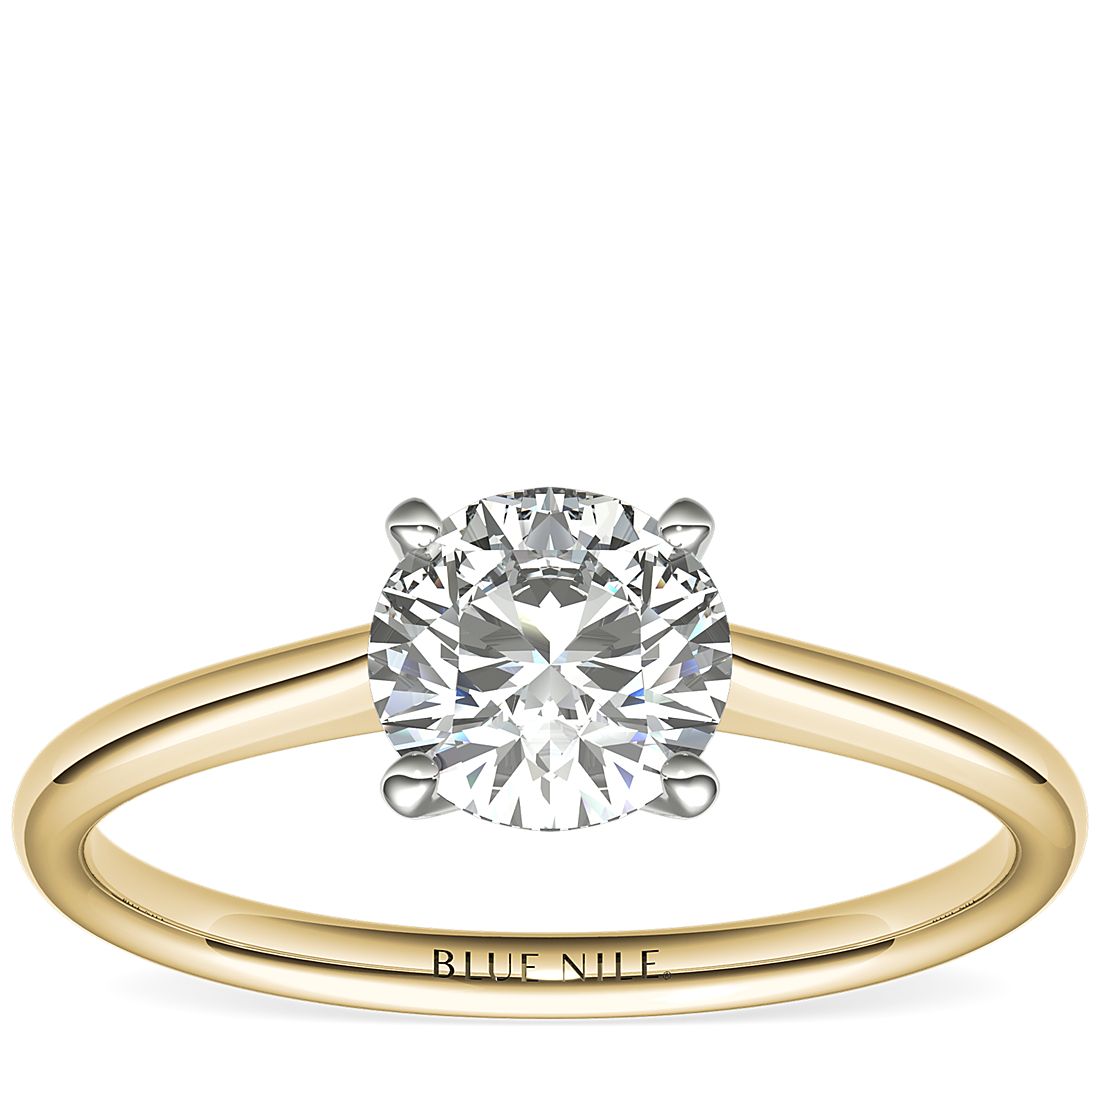 1.35 Carat Solitaire Diamond Round Cut Engagement Rings Womens 14K 18 Karat Solid Real Gold Ladies Ring Size